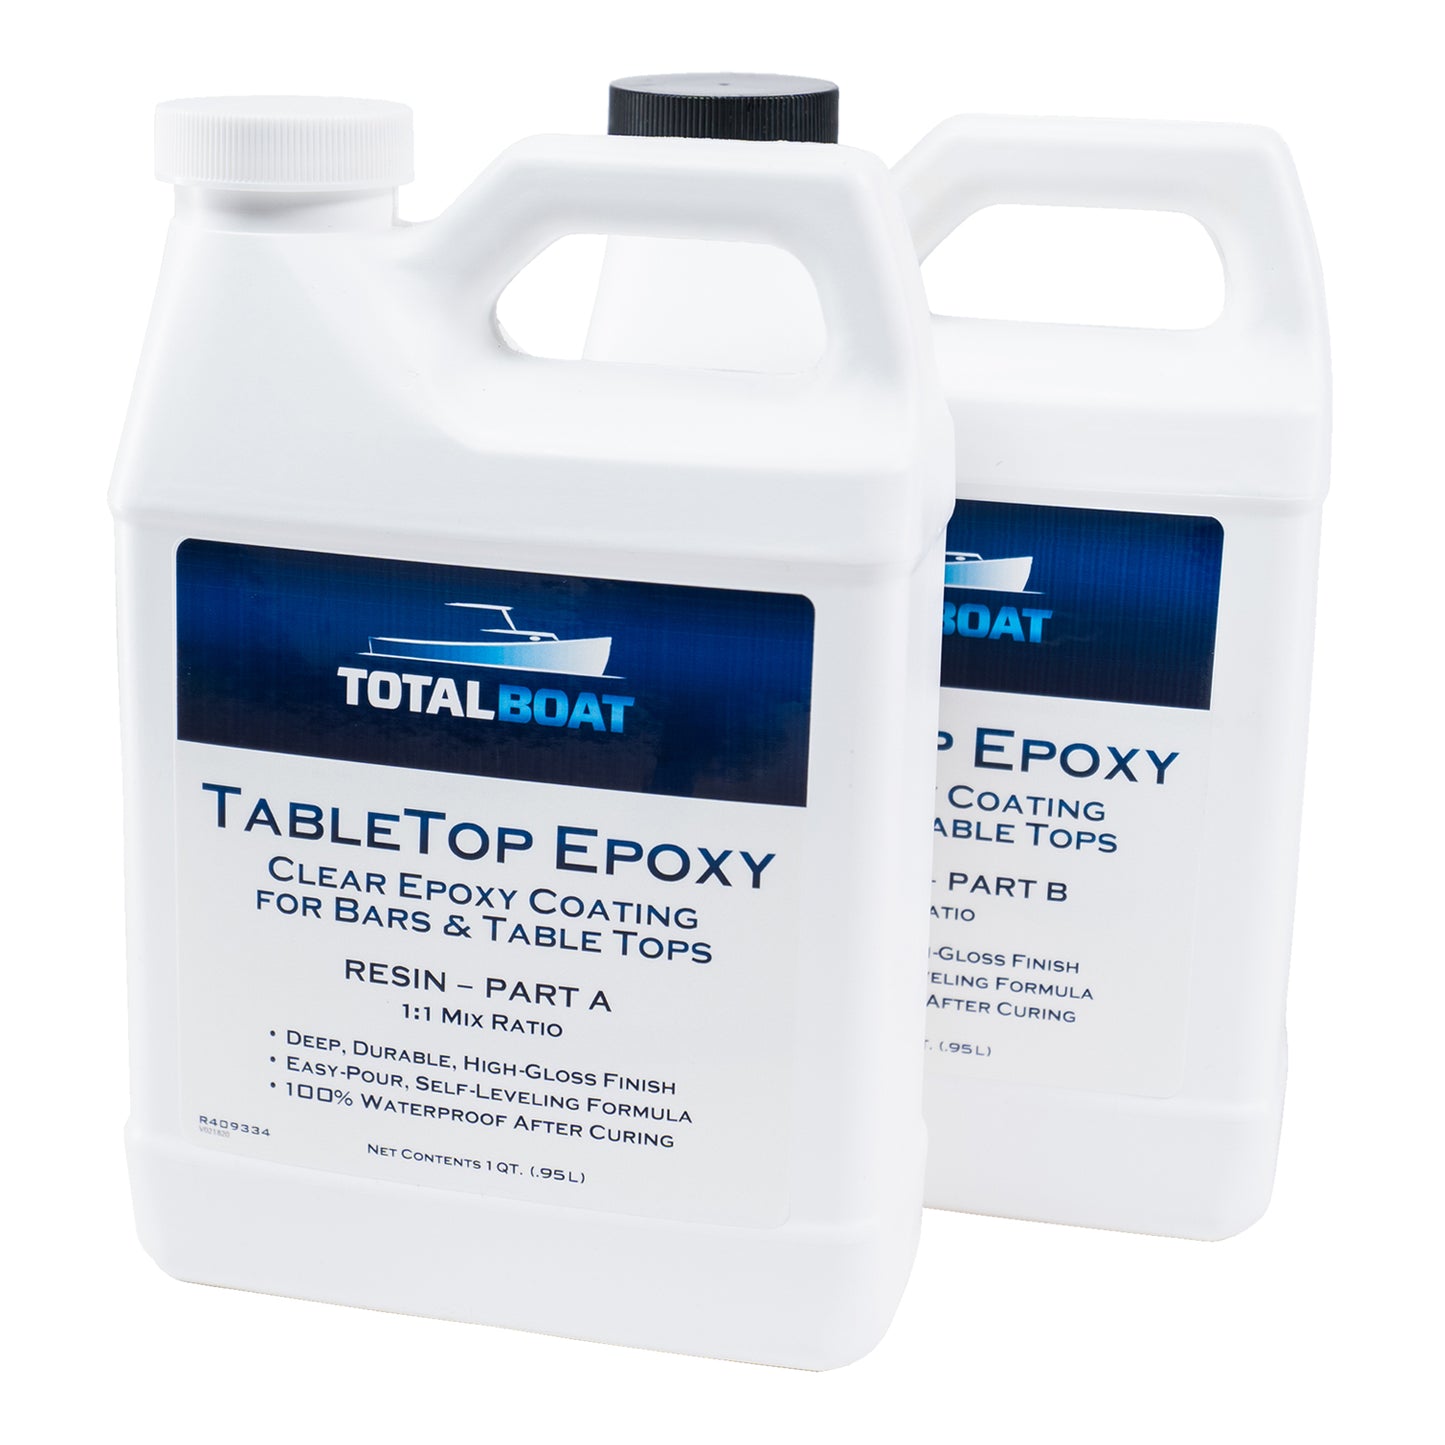 TotalBoat Table Top Epoxy Resin For Bar Tops and Tabletops